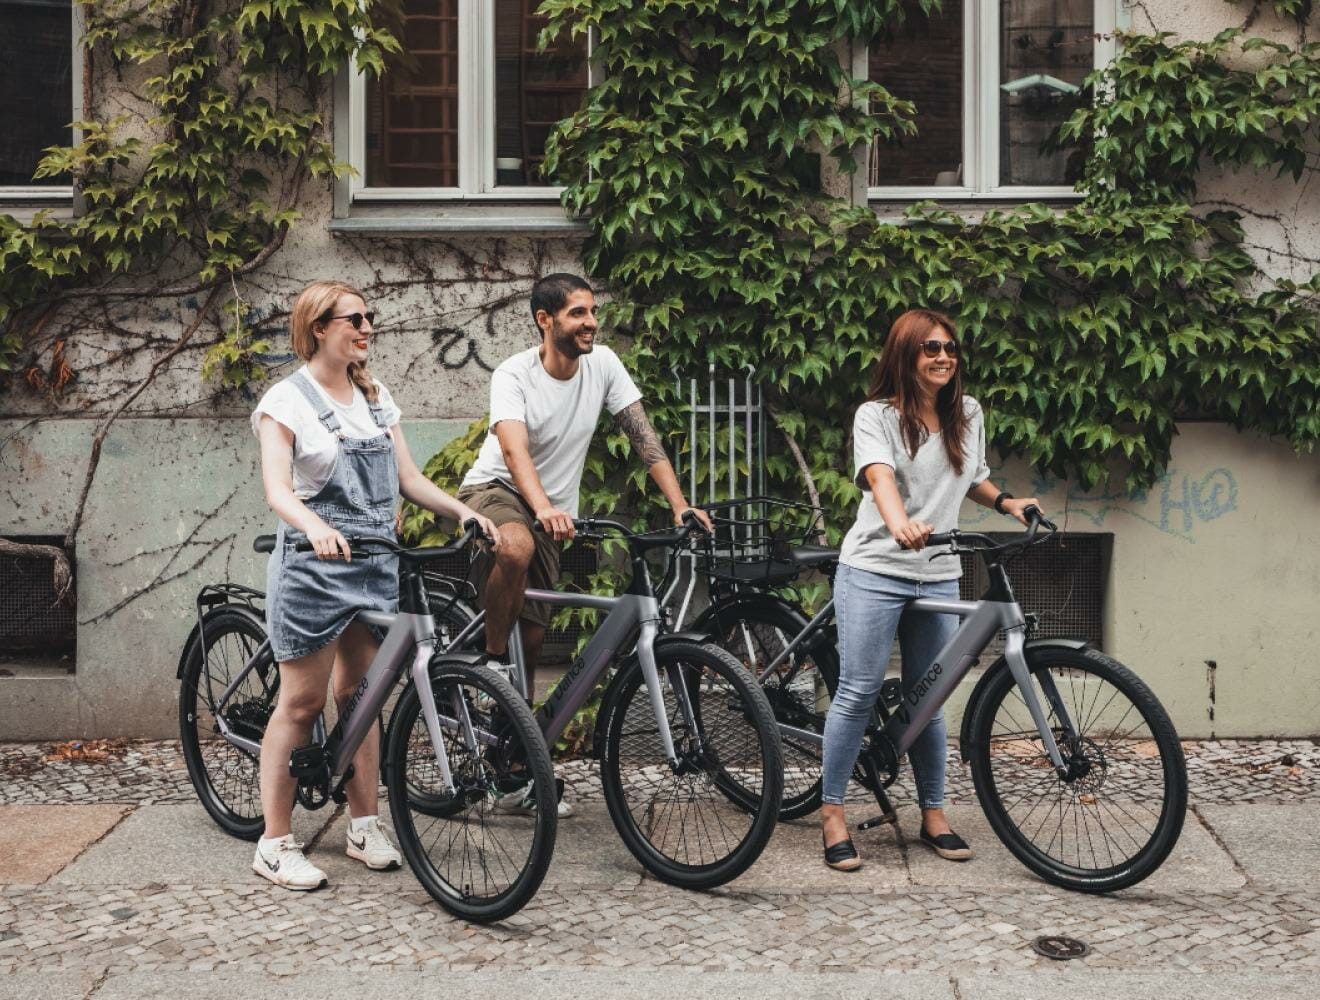 A group of citygoers on their ebikes in a city.